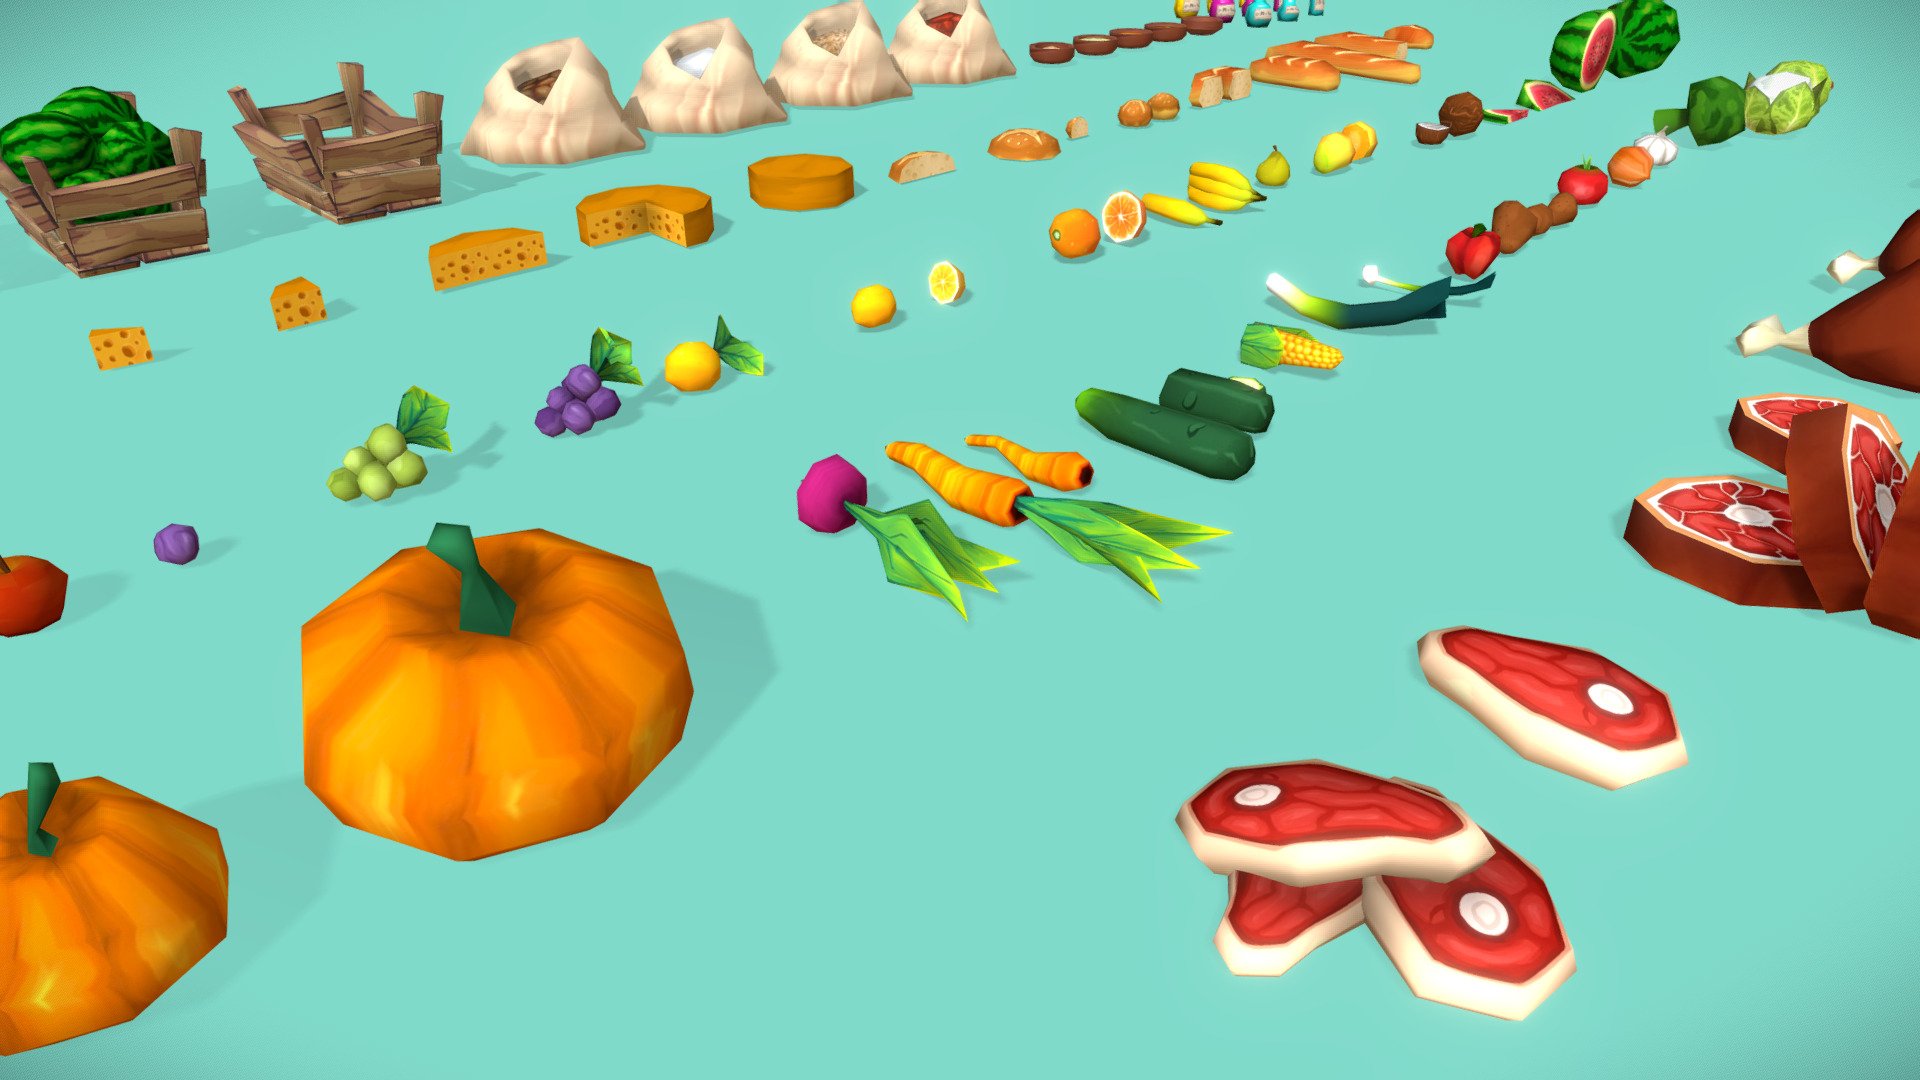 Now on our Webstore! https://tidalflask.com/store/jaWg/fantastic-food-pack
With FANTASTIC - Food Pack you get a huge variety of food items to populate empty tables, shelves and storerooms in your game. This pack contains 113 food items. Each individually handpainted and all of them sharing one texture atlas for optimal performance.

Follow us for news 

Web | Twitter | Facebook - FANTASTIC - Food Pack - 3D model by TidalFlaskStudios 3d model